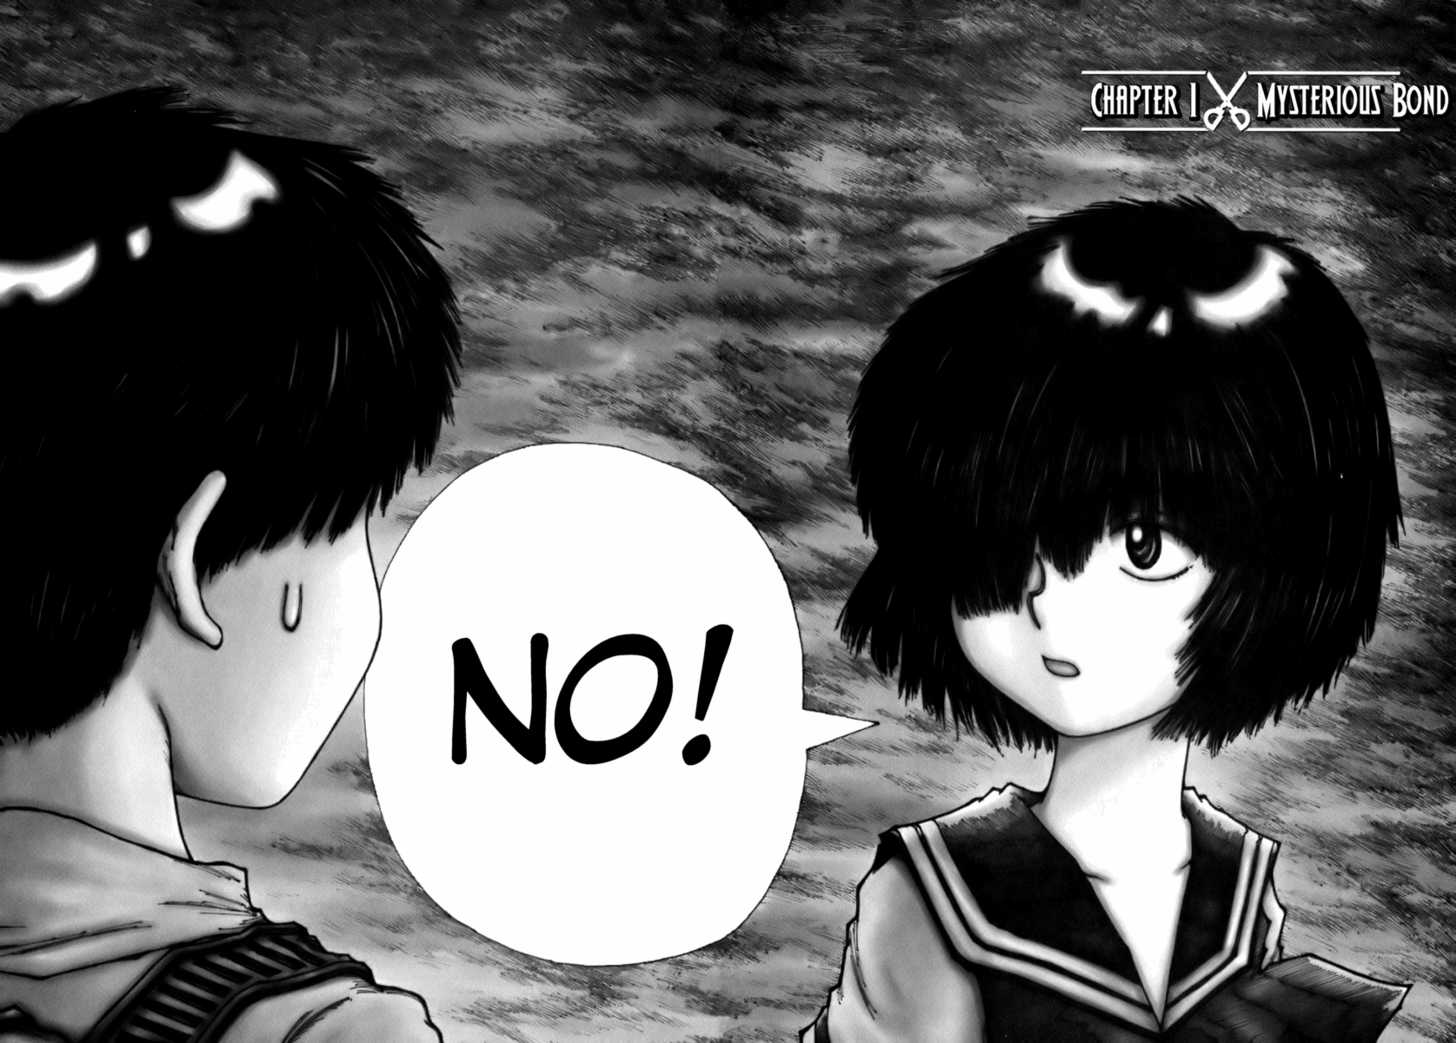 This is my favorite panel of Mysterious Girlfriend X, just something about  it seems so romantic on how their relationship, their bond, grows in a way  not even I can describe (btw